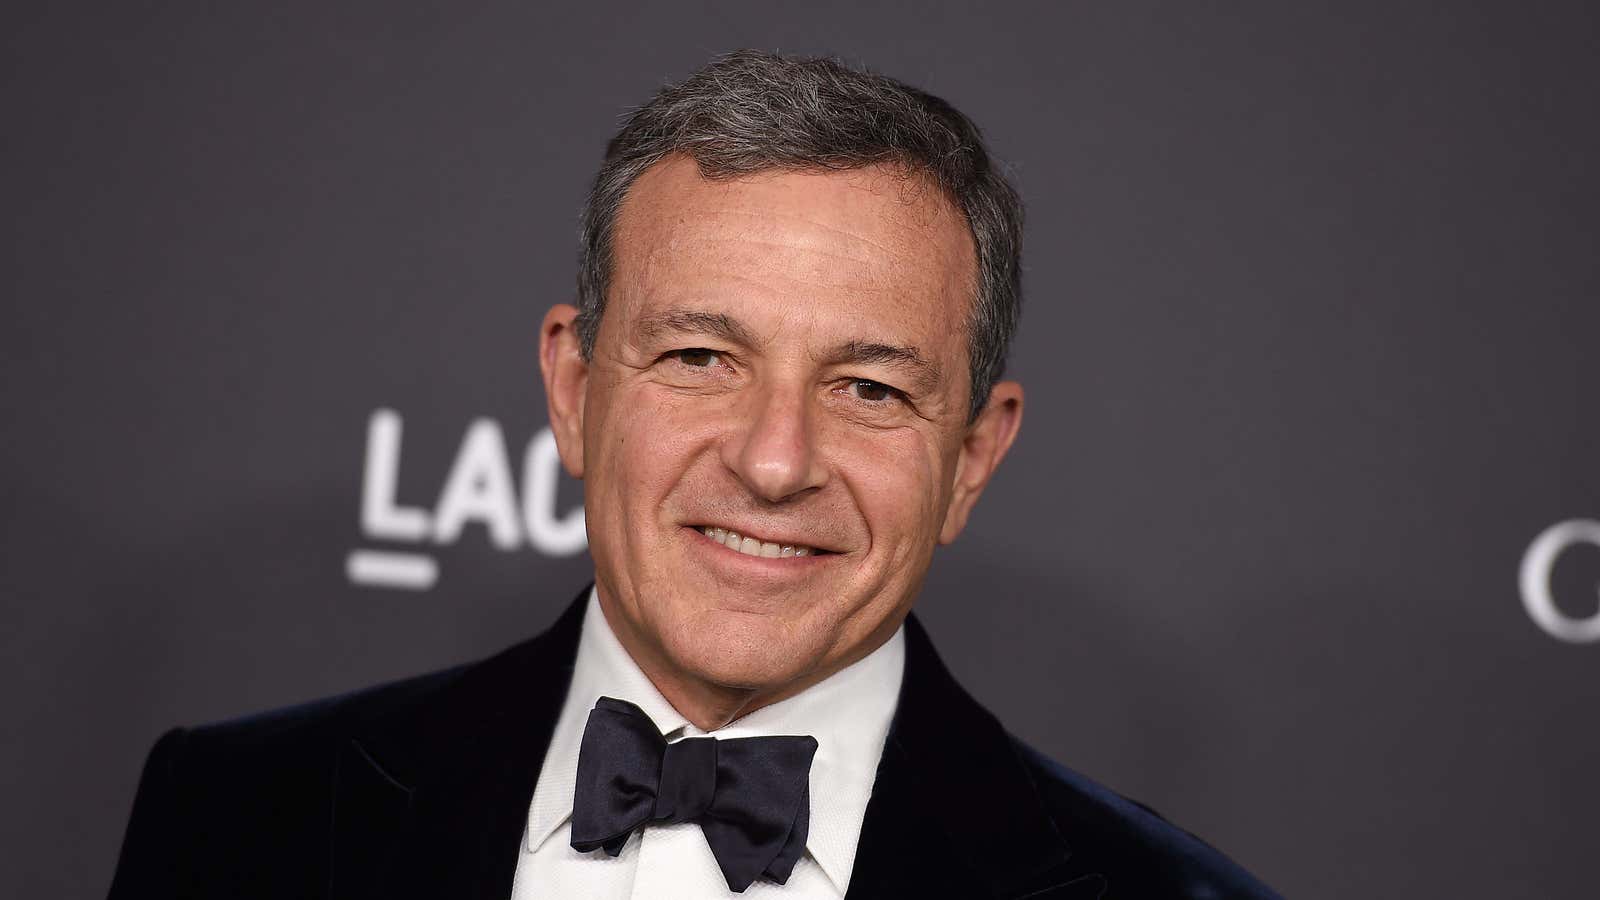 Iger’s legacy at Disney will hinge on leaving the company in the right hands.